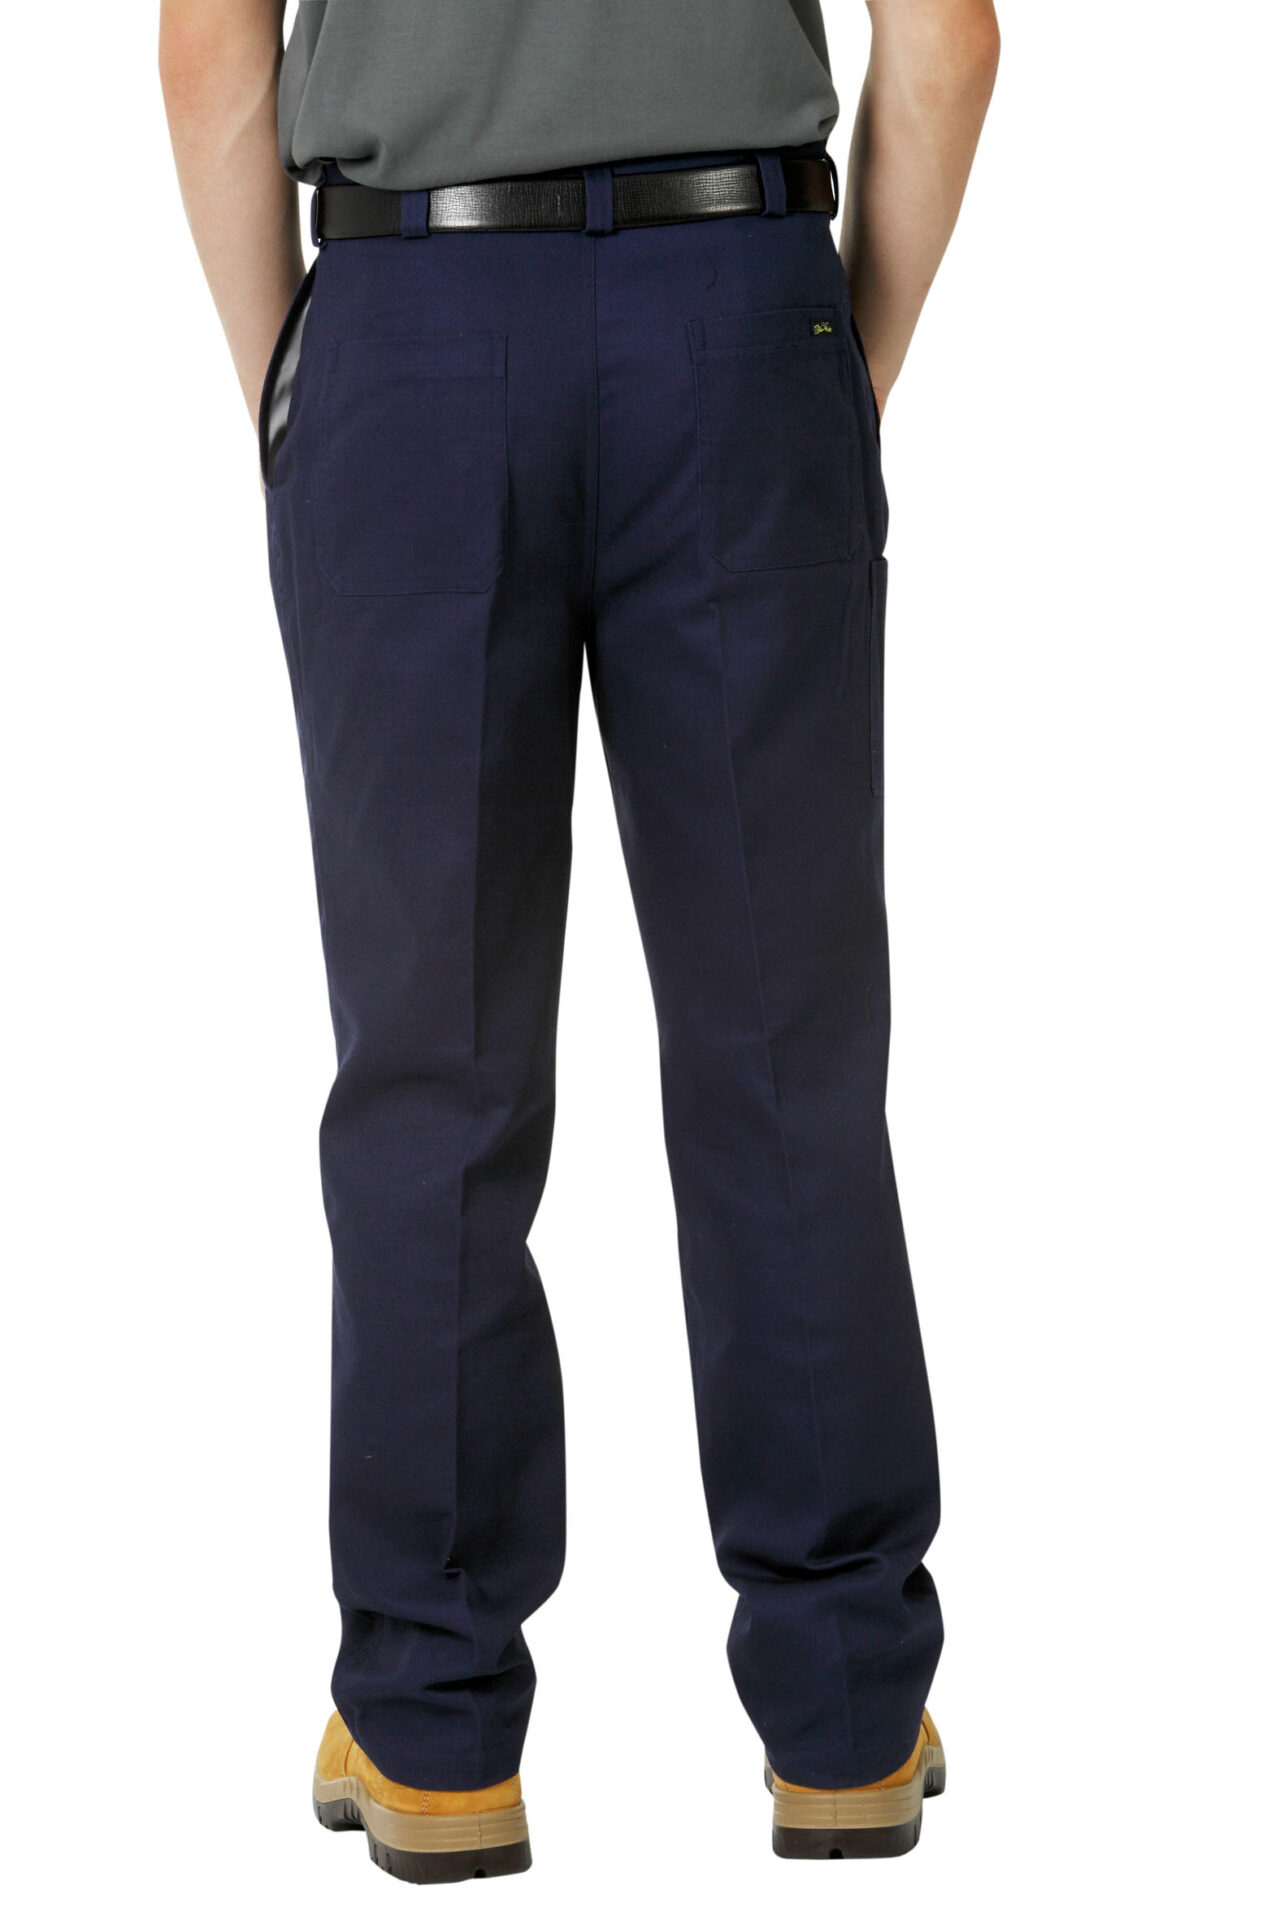 Buy W81-Heavy Cotton Drill Trousers at Best Price - AJ Safety